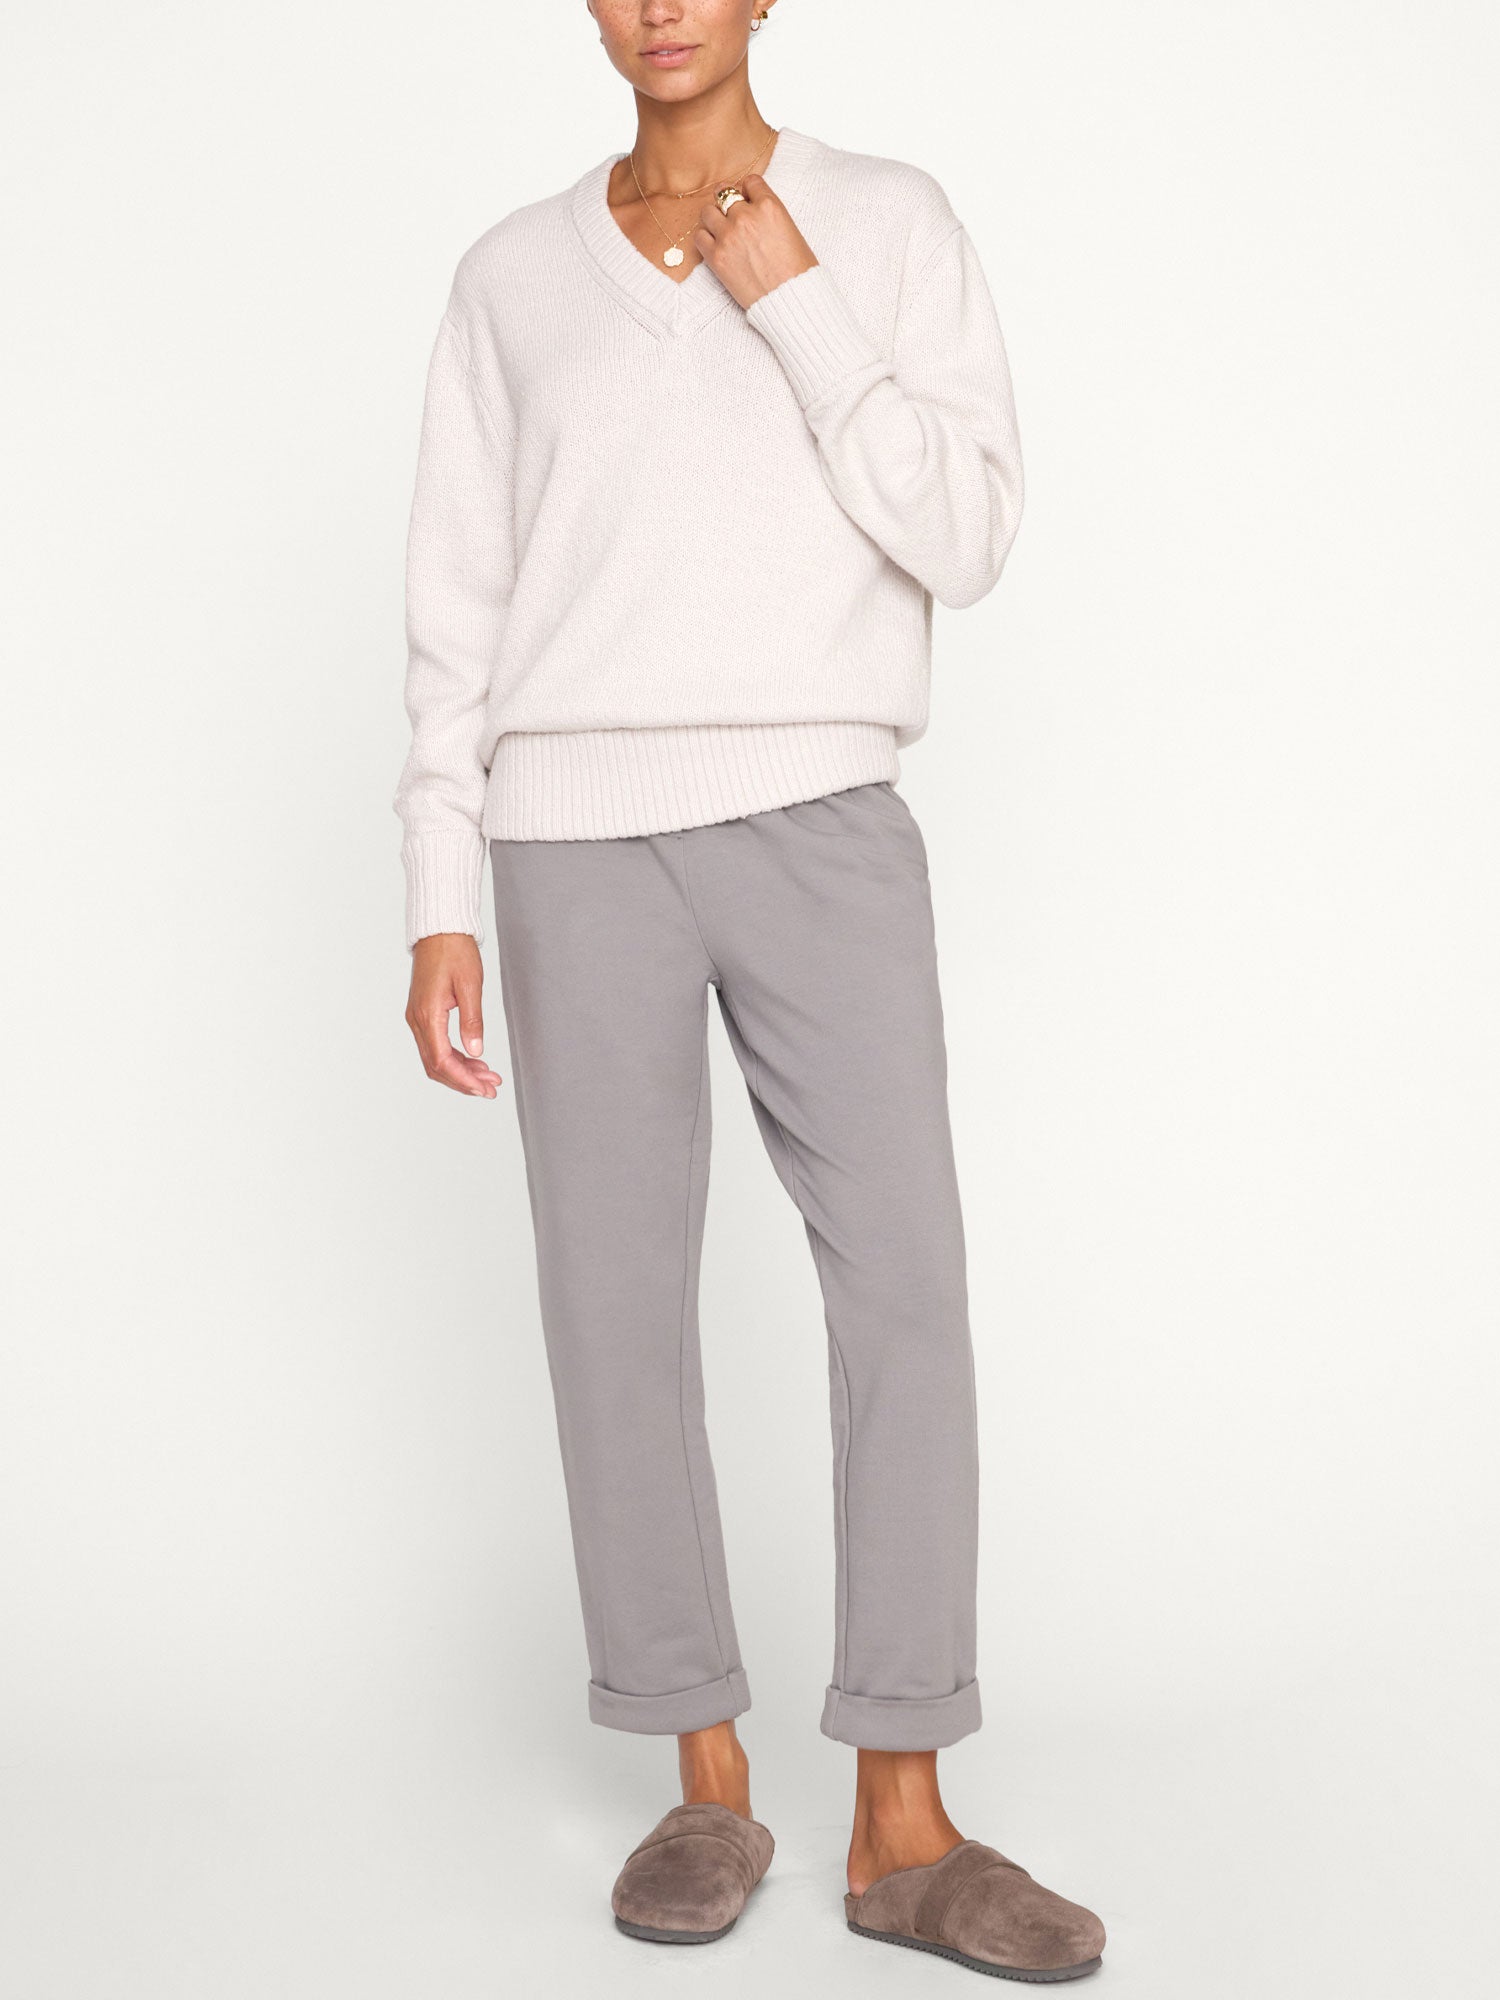 Penn French Terry grey ankle pant full view